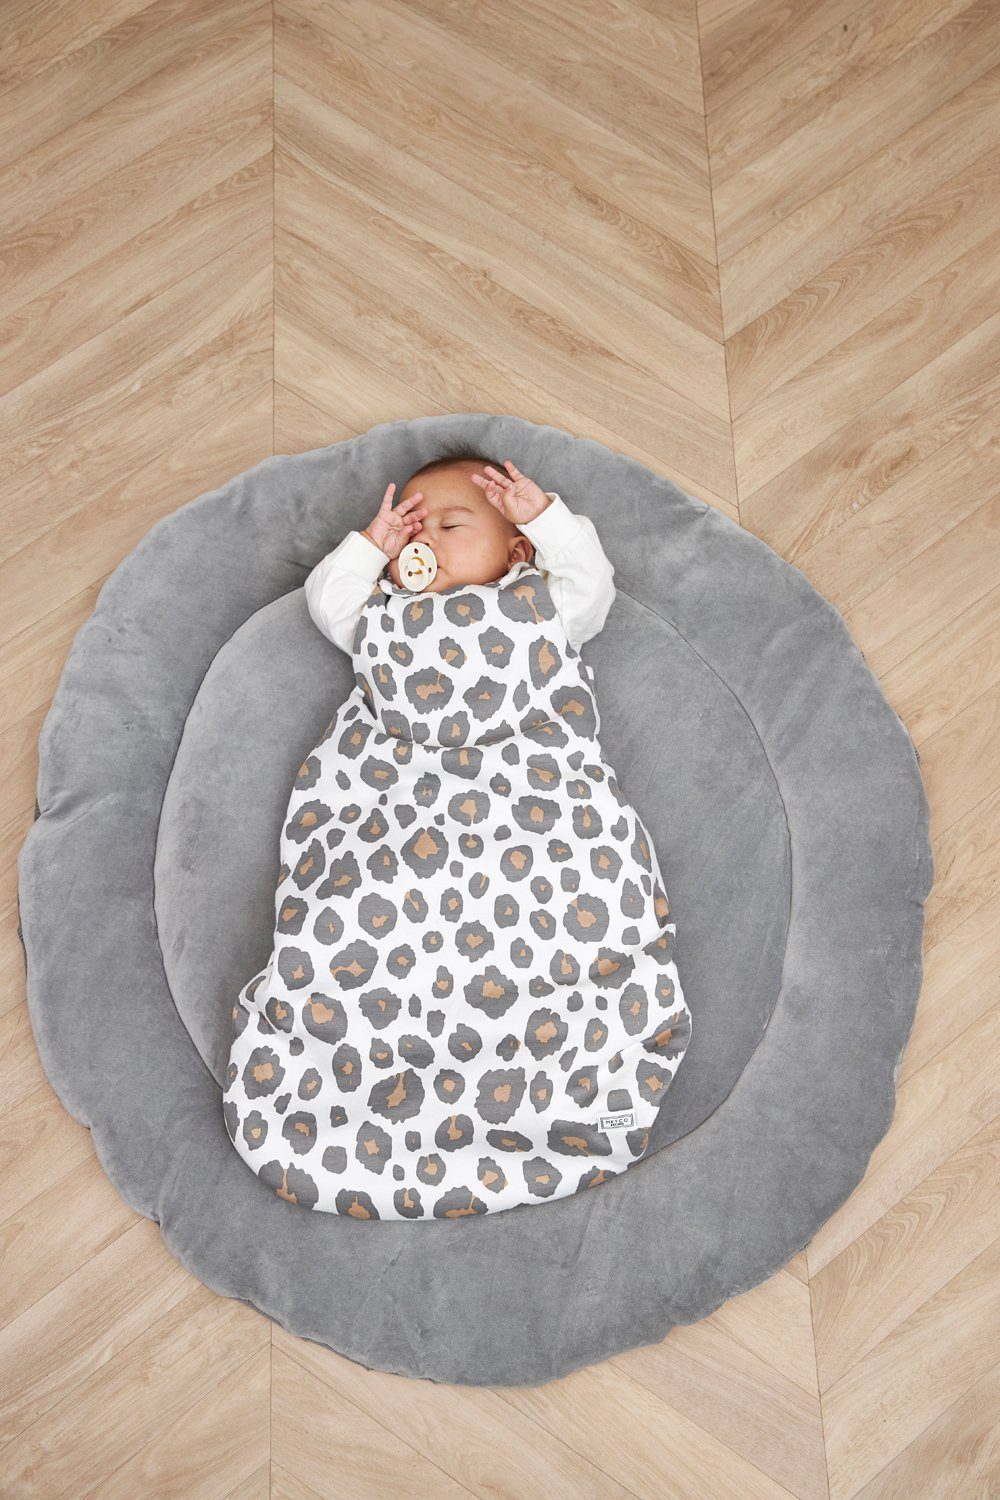 Neutral (1 Baby Panther 62cm tlg), Meyco Babyschlafsack